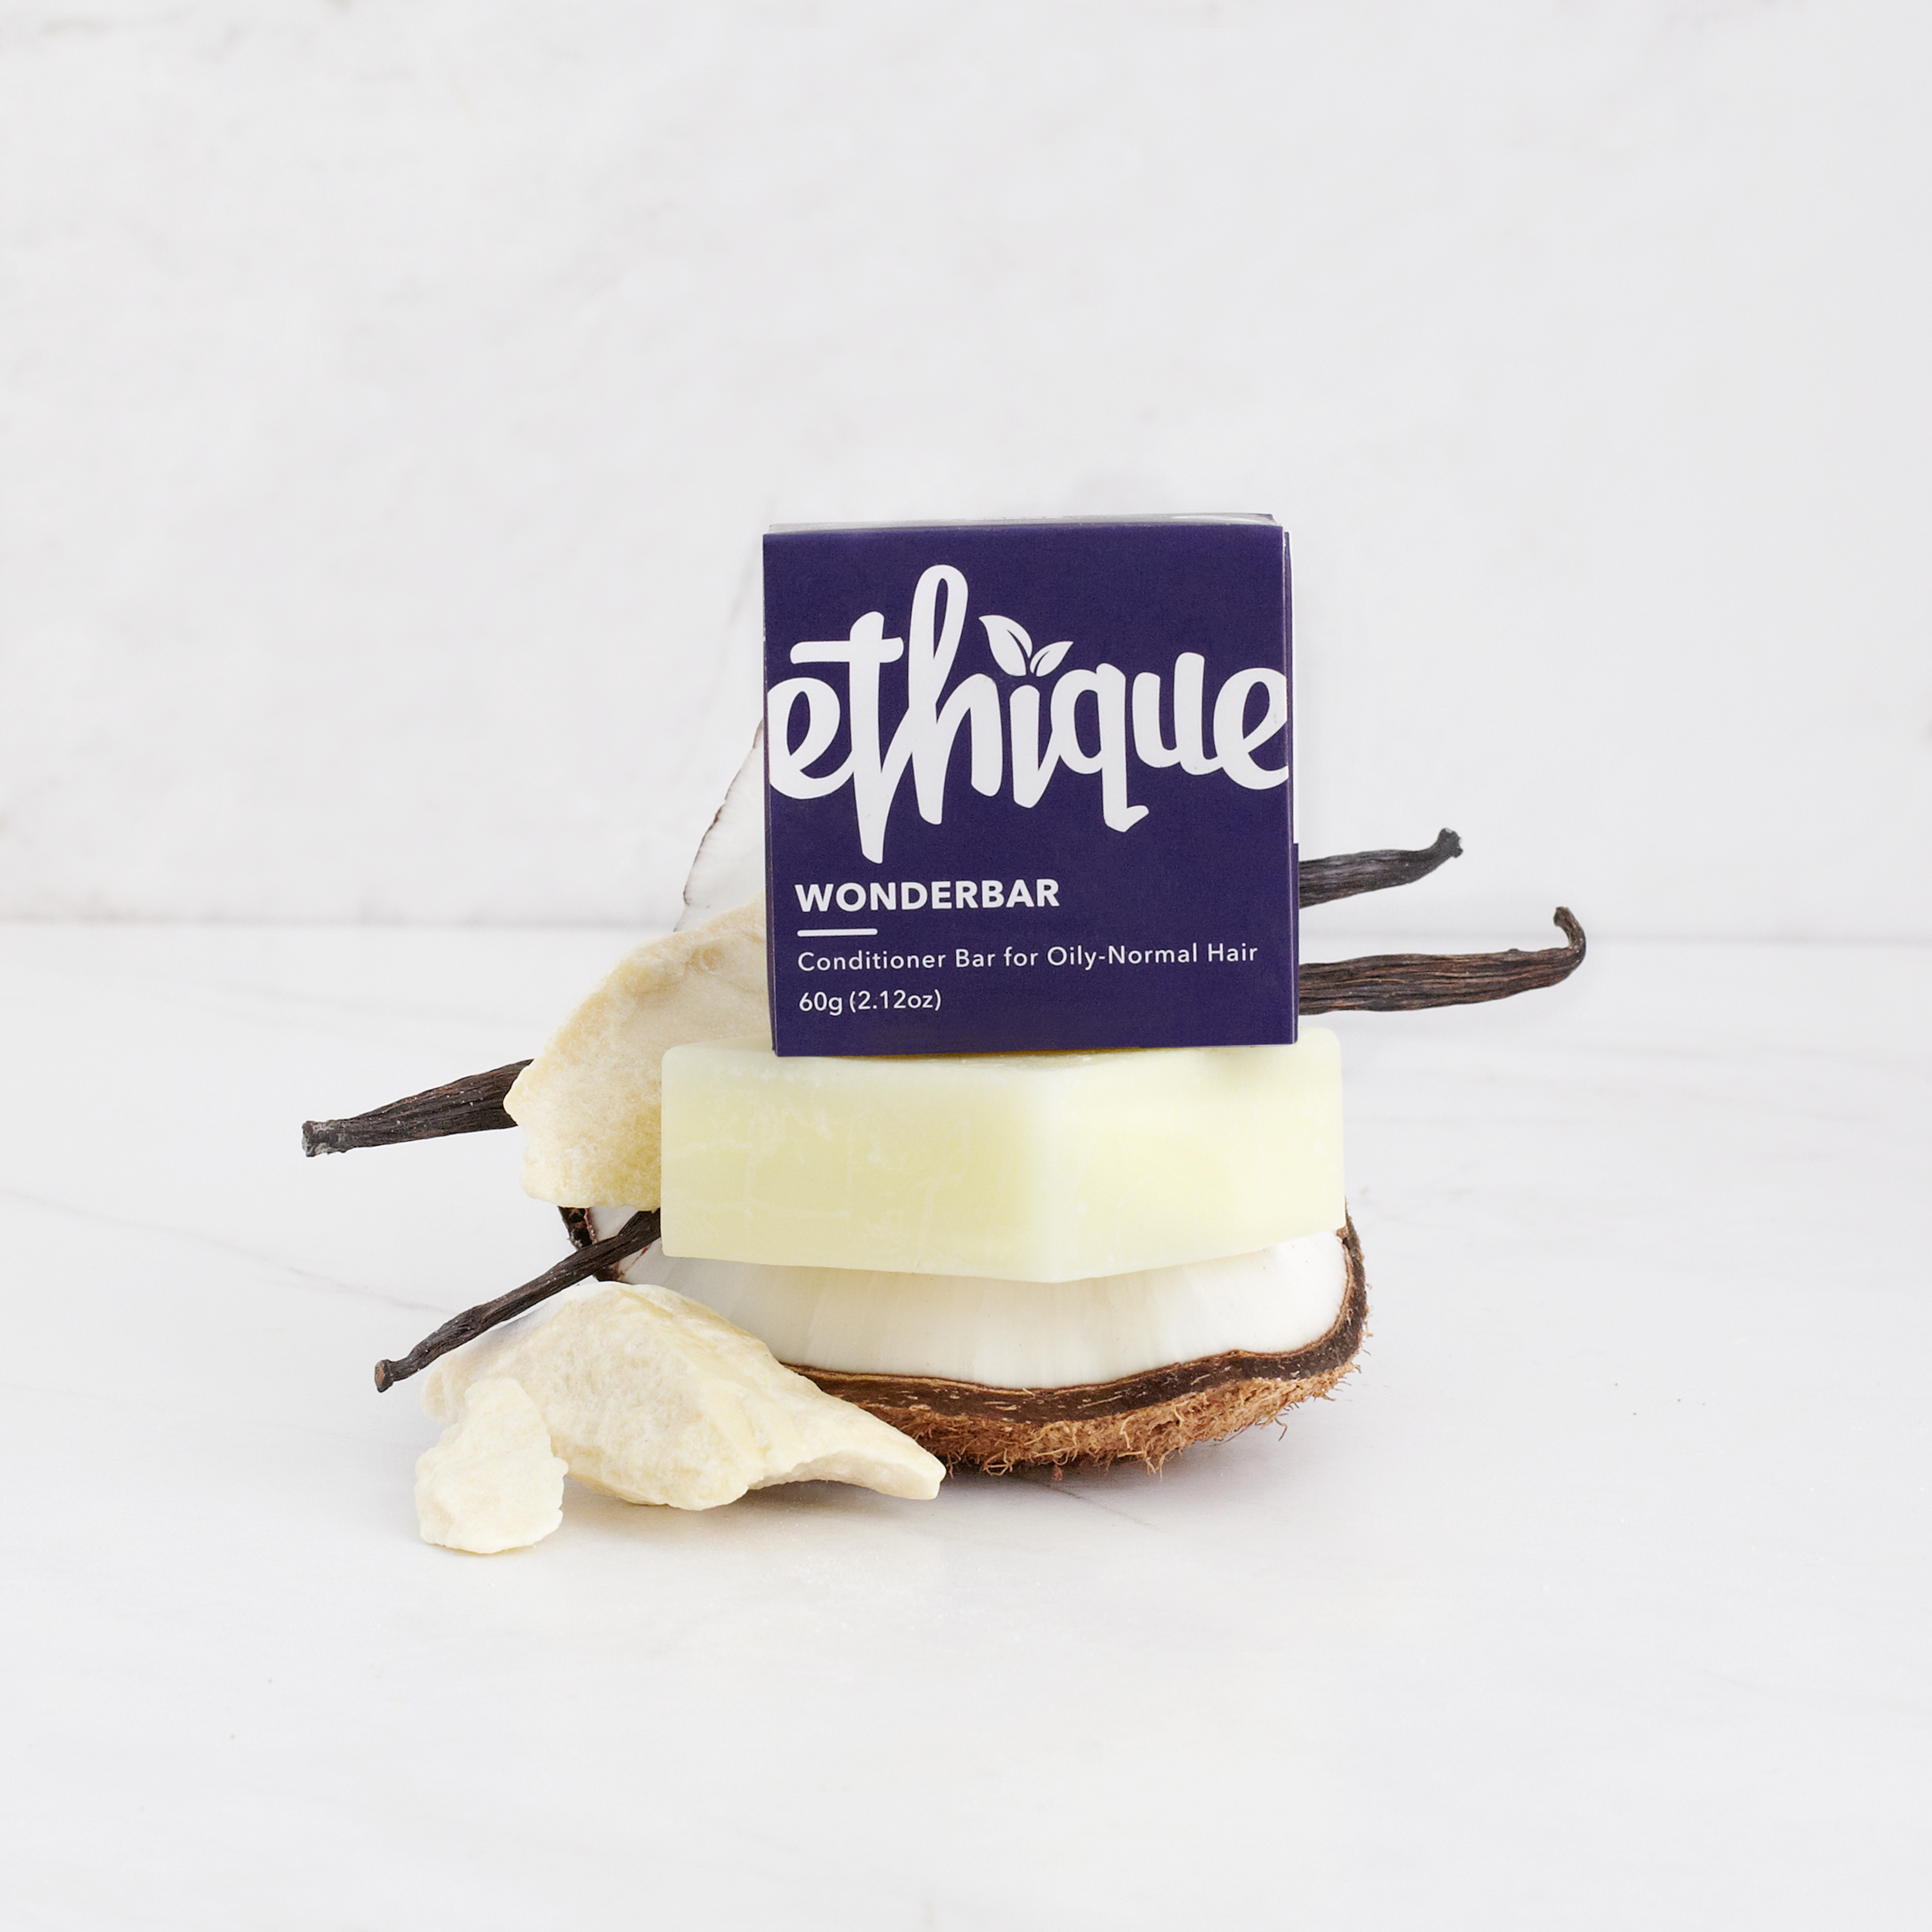 Ethique Wonderbar Conditioner Bar for Oily to Normal Hair - 2.12oz - image 7 of 9